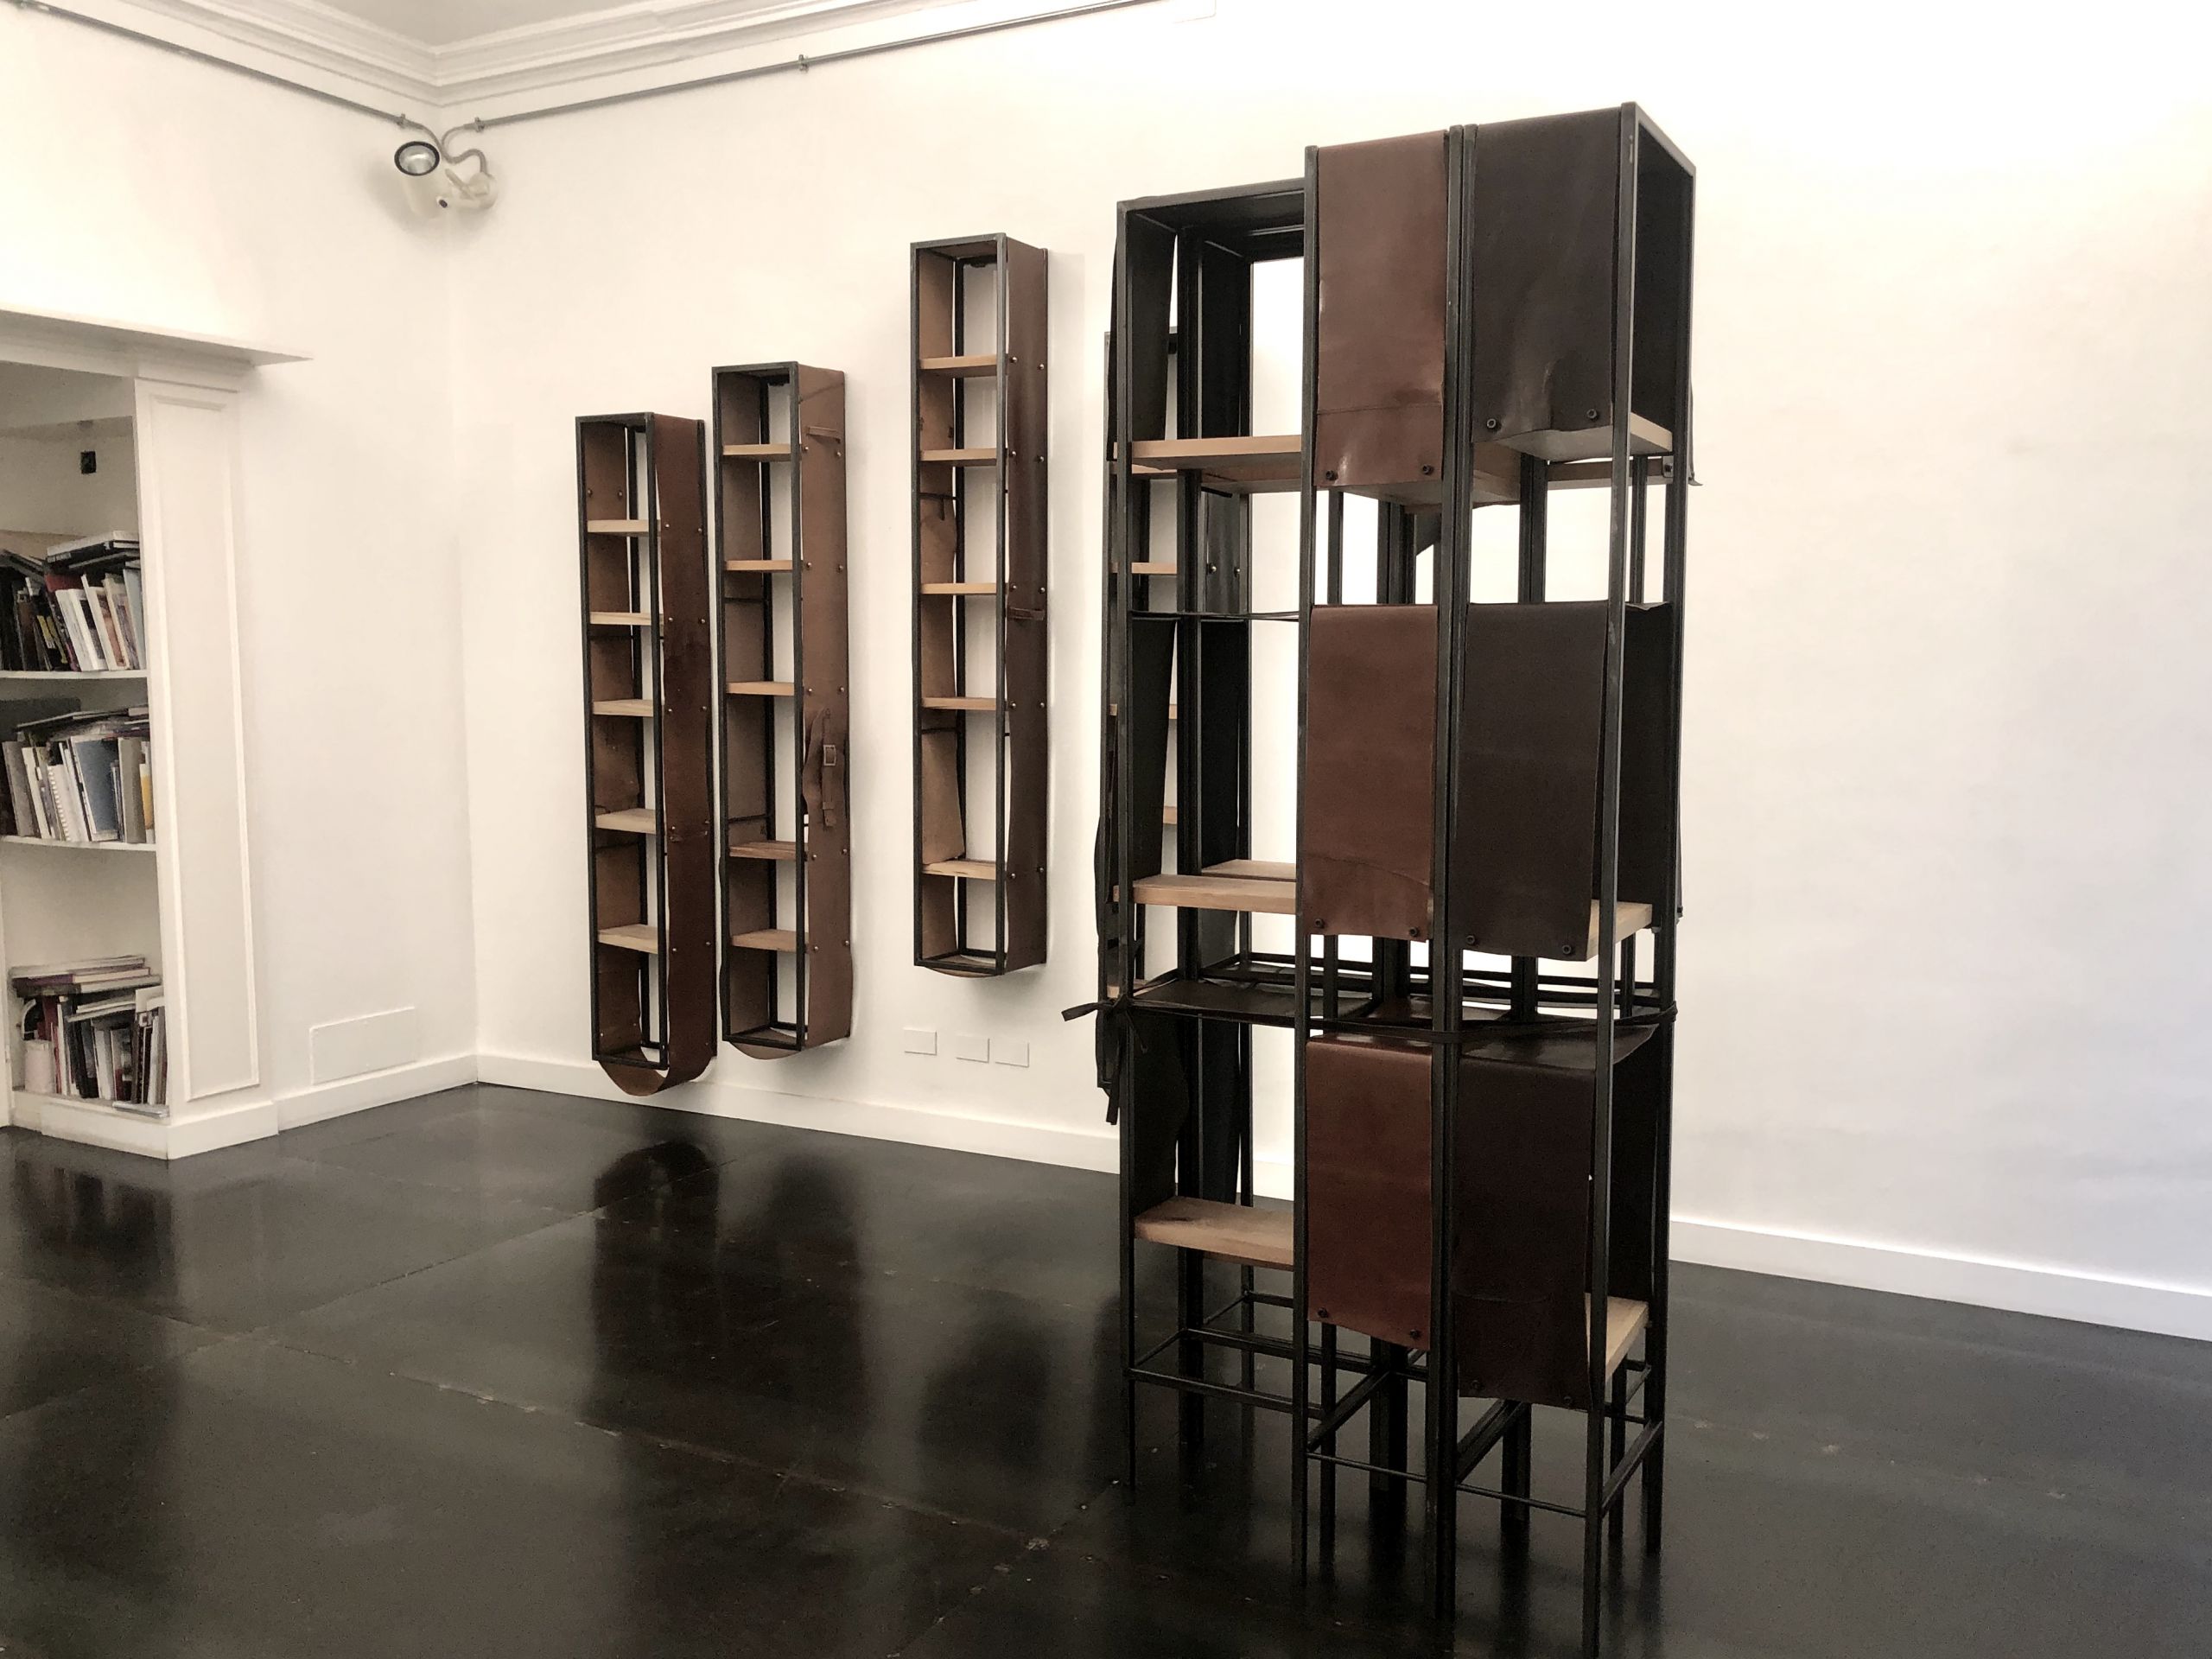 Magda_t_Home. Installation view at Riccardo Costantini Contemporary, Torino 2020